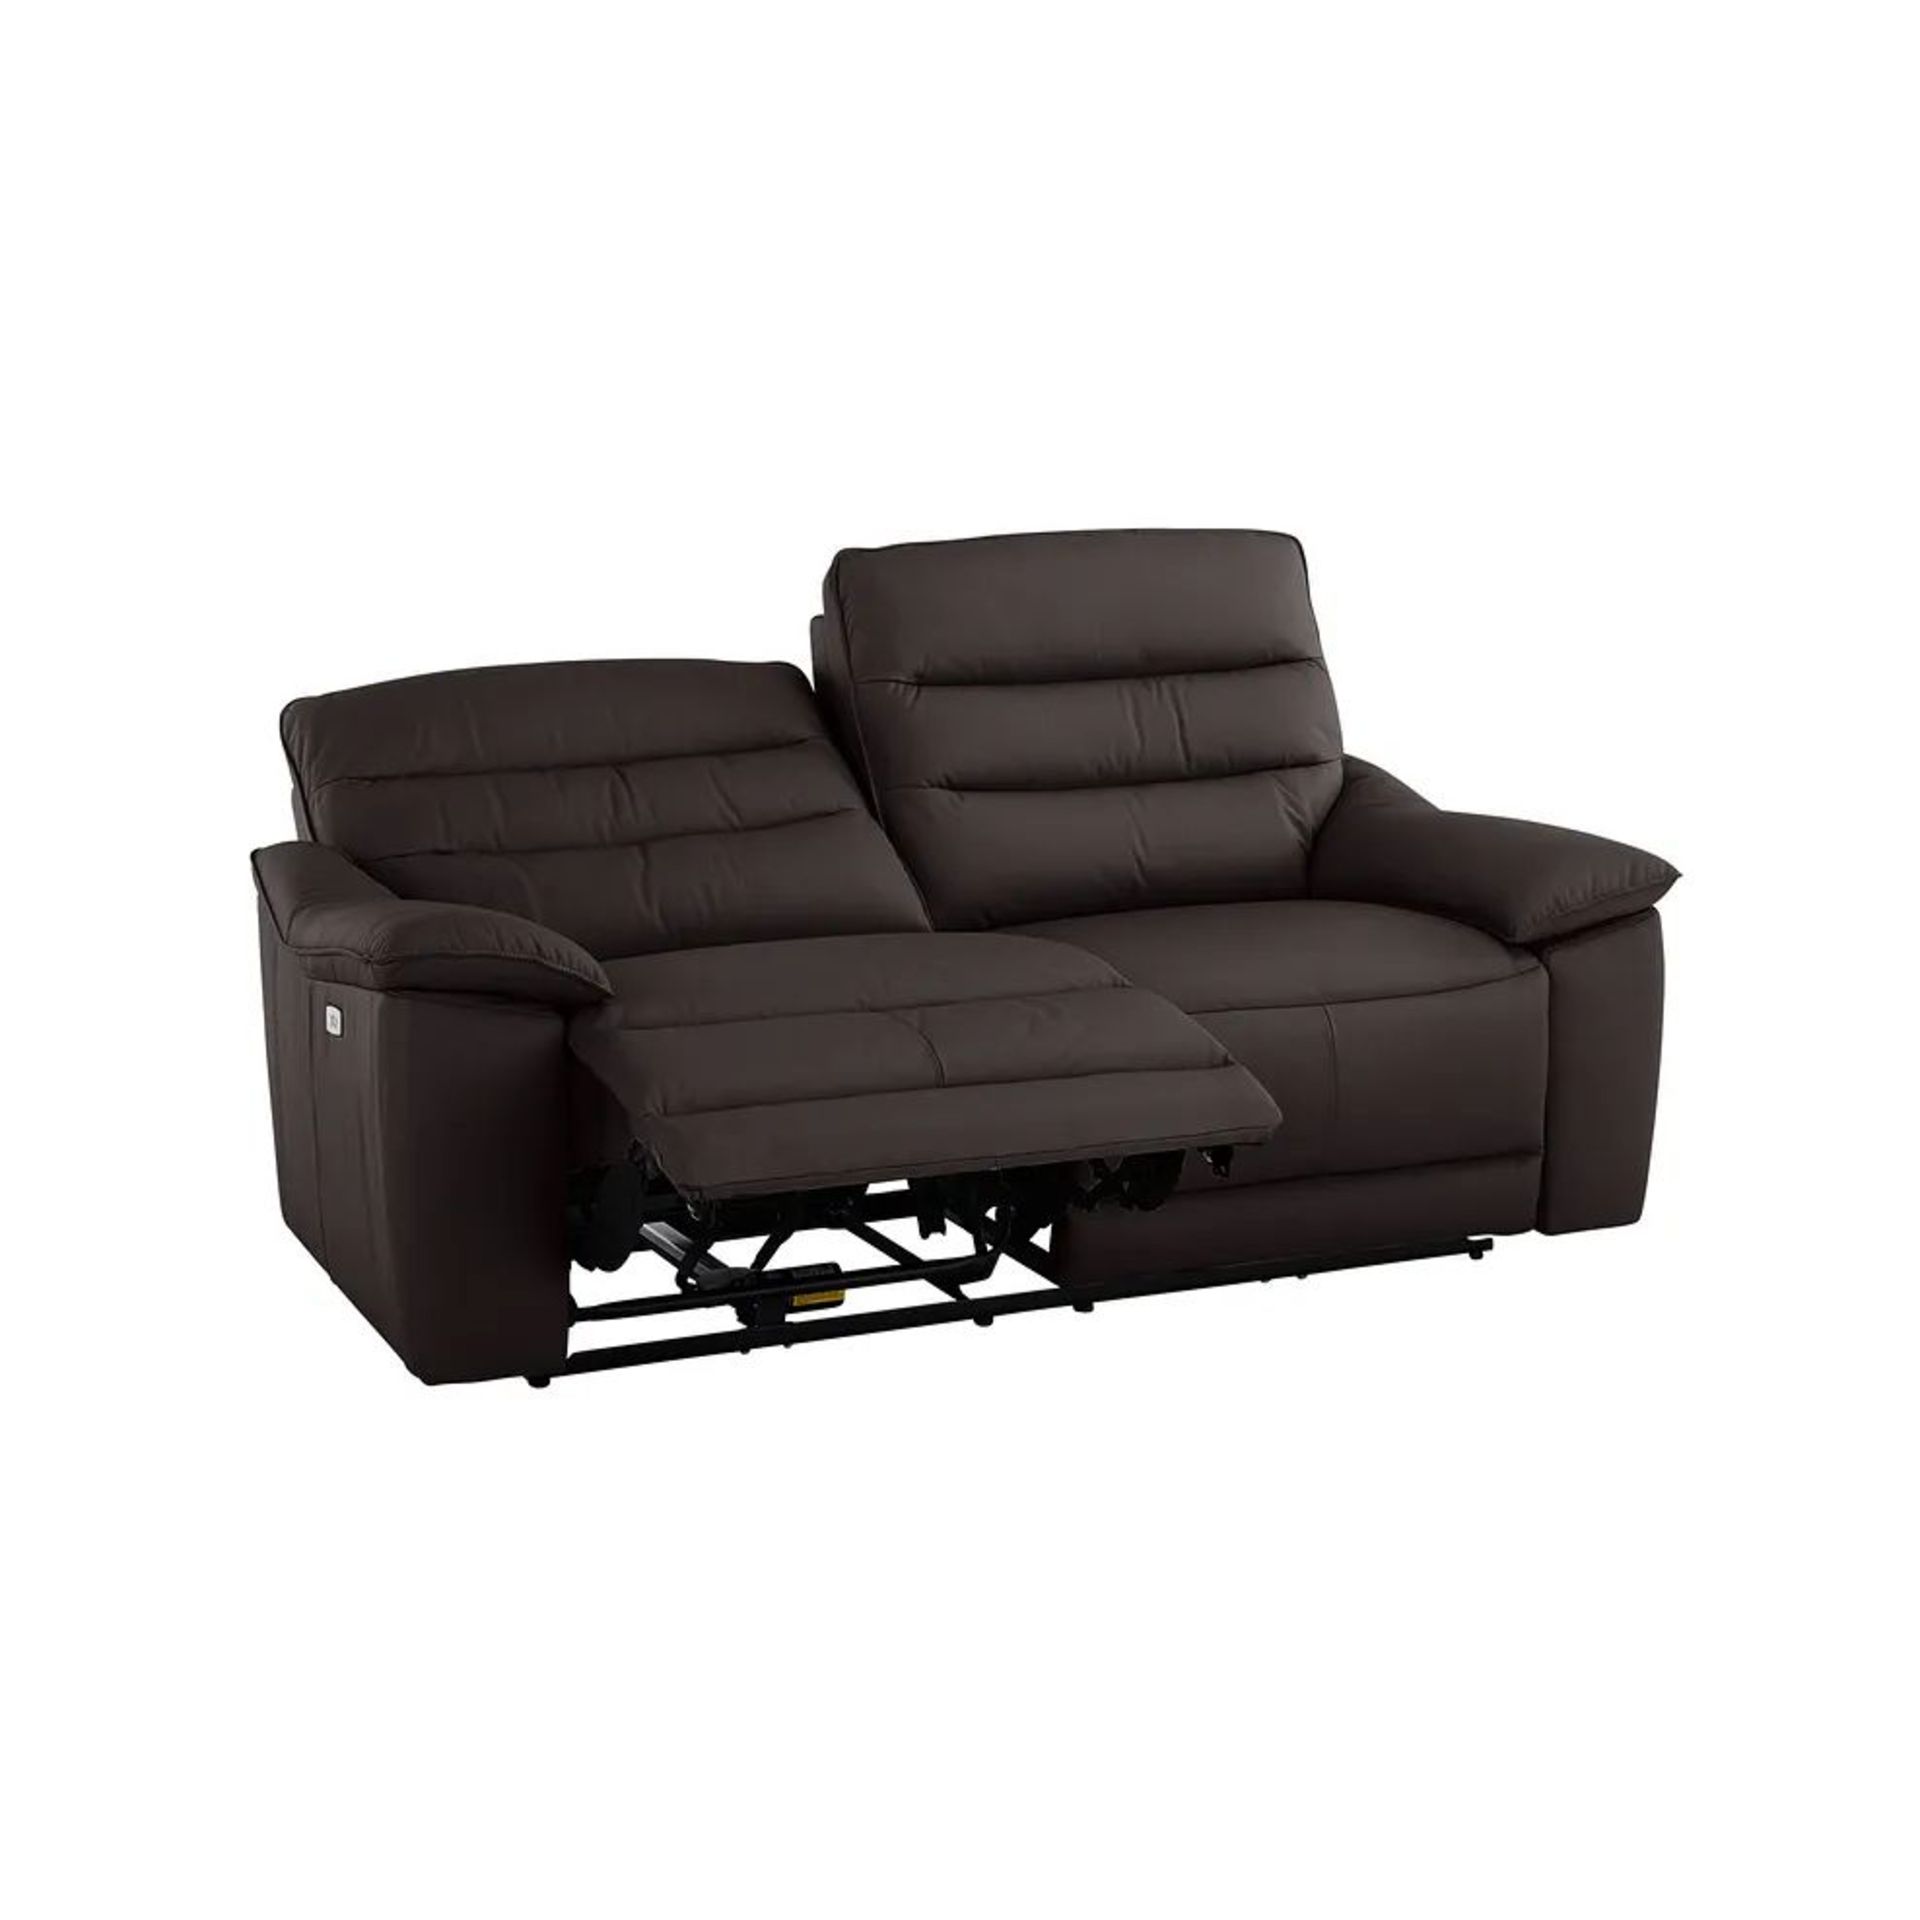 BRAND NEW CARTER 3 Seater Electric Recliner Sofa - BROWN LEATHER. RRP £1699. Showcasing classic - Bild 4 aus 11